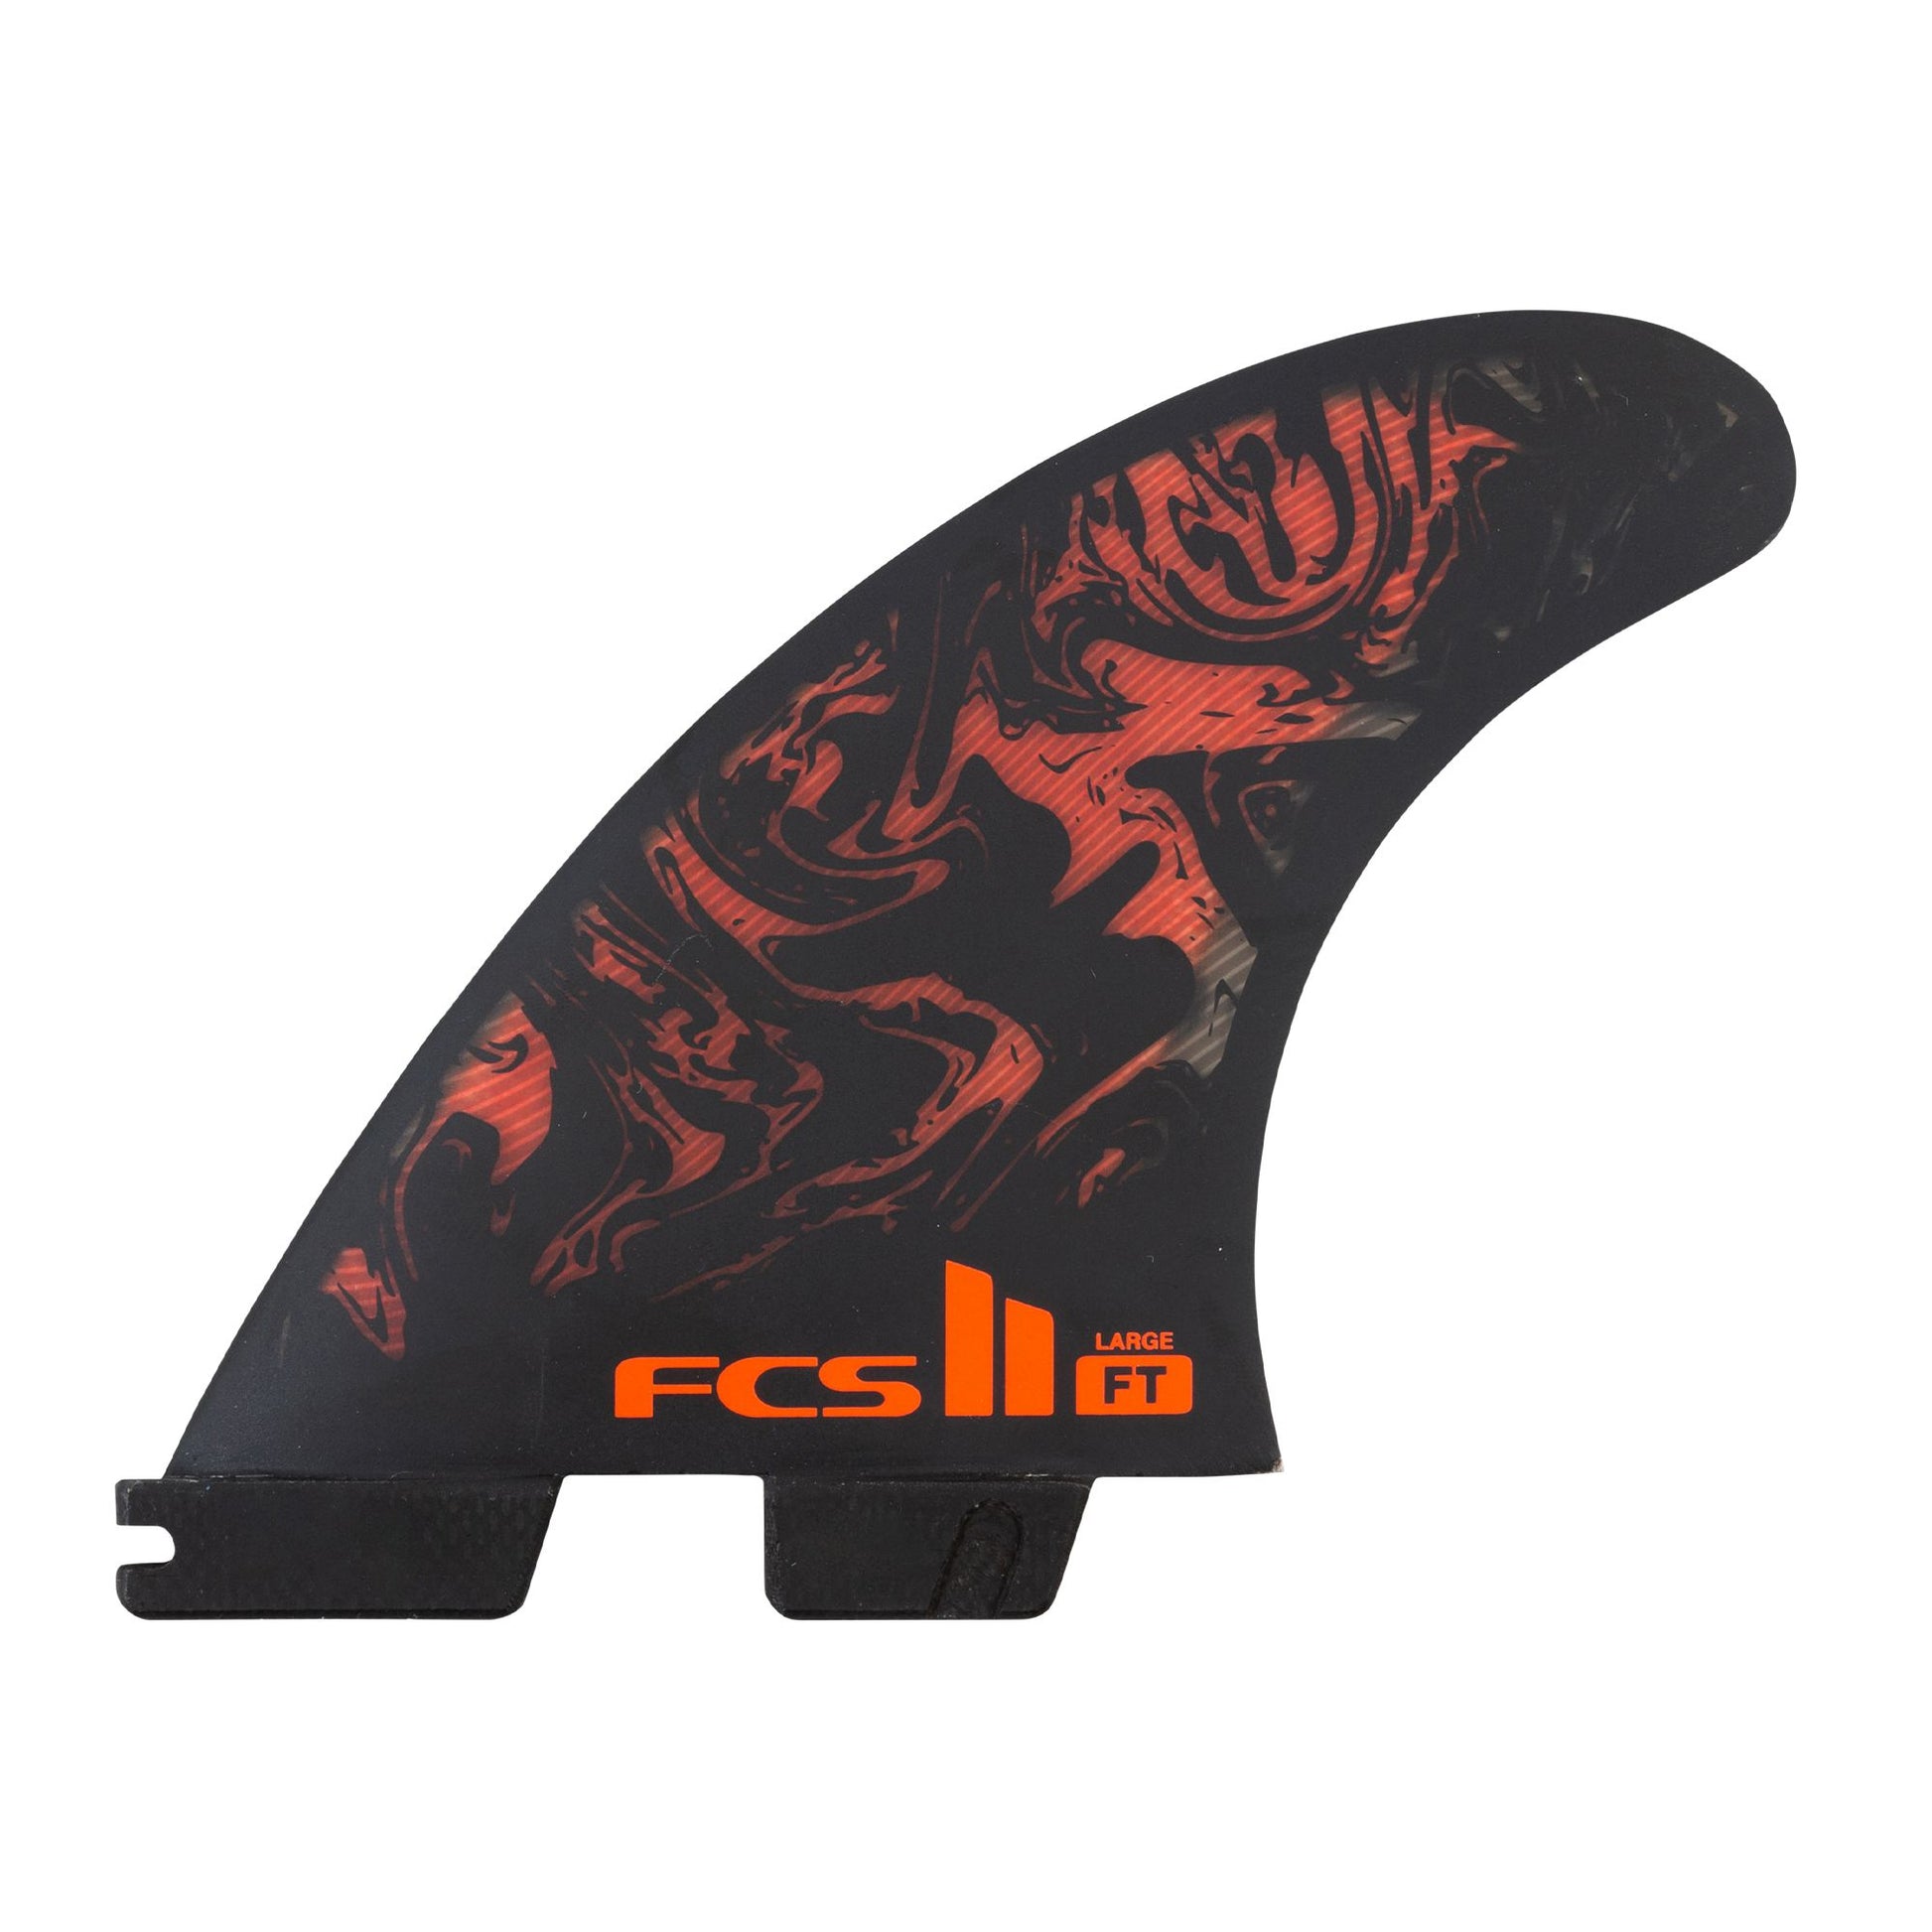 FCS II FT FILIPE TOLEDO PC LARGE TRI FIN SET in black and red showing front fin